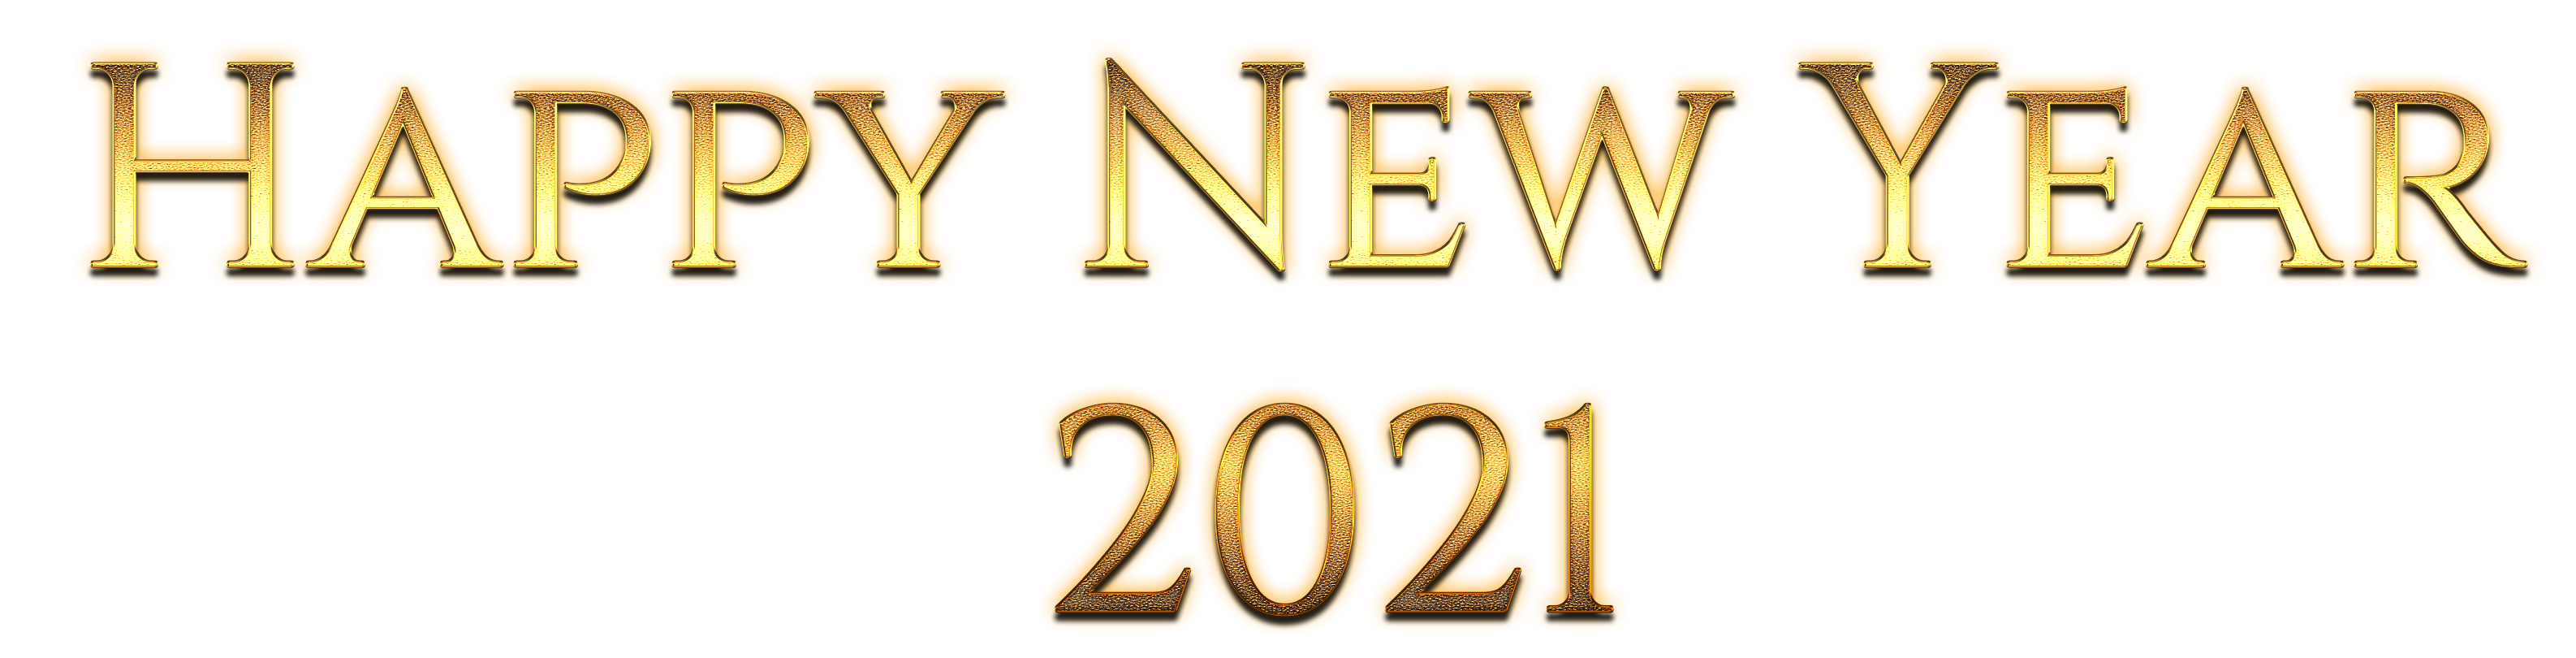 Happy New Year 2021 PNG Free Download | PNG All